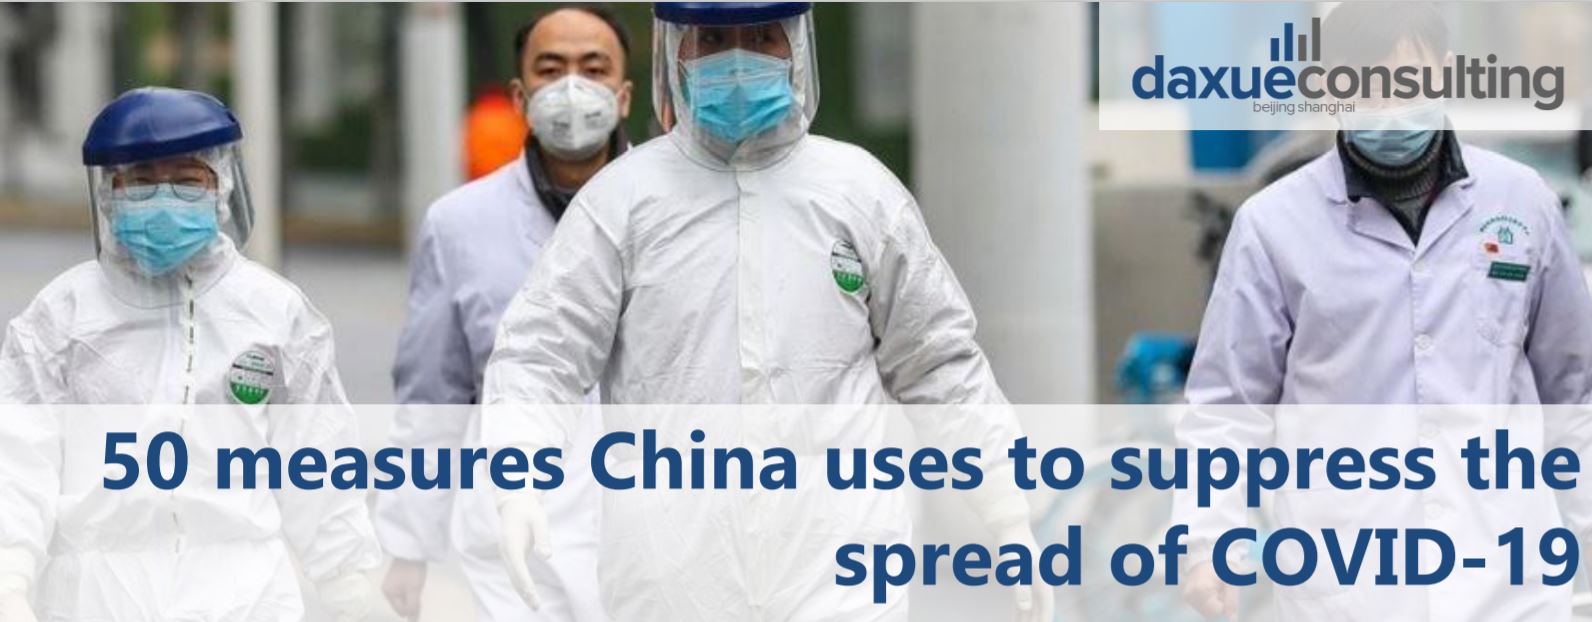 50 measures China uses to suppress the spread of COVID-19